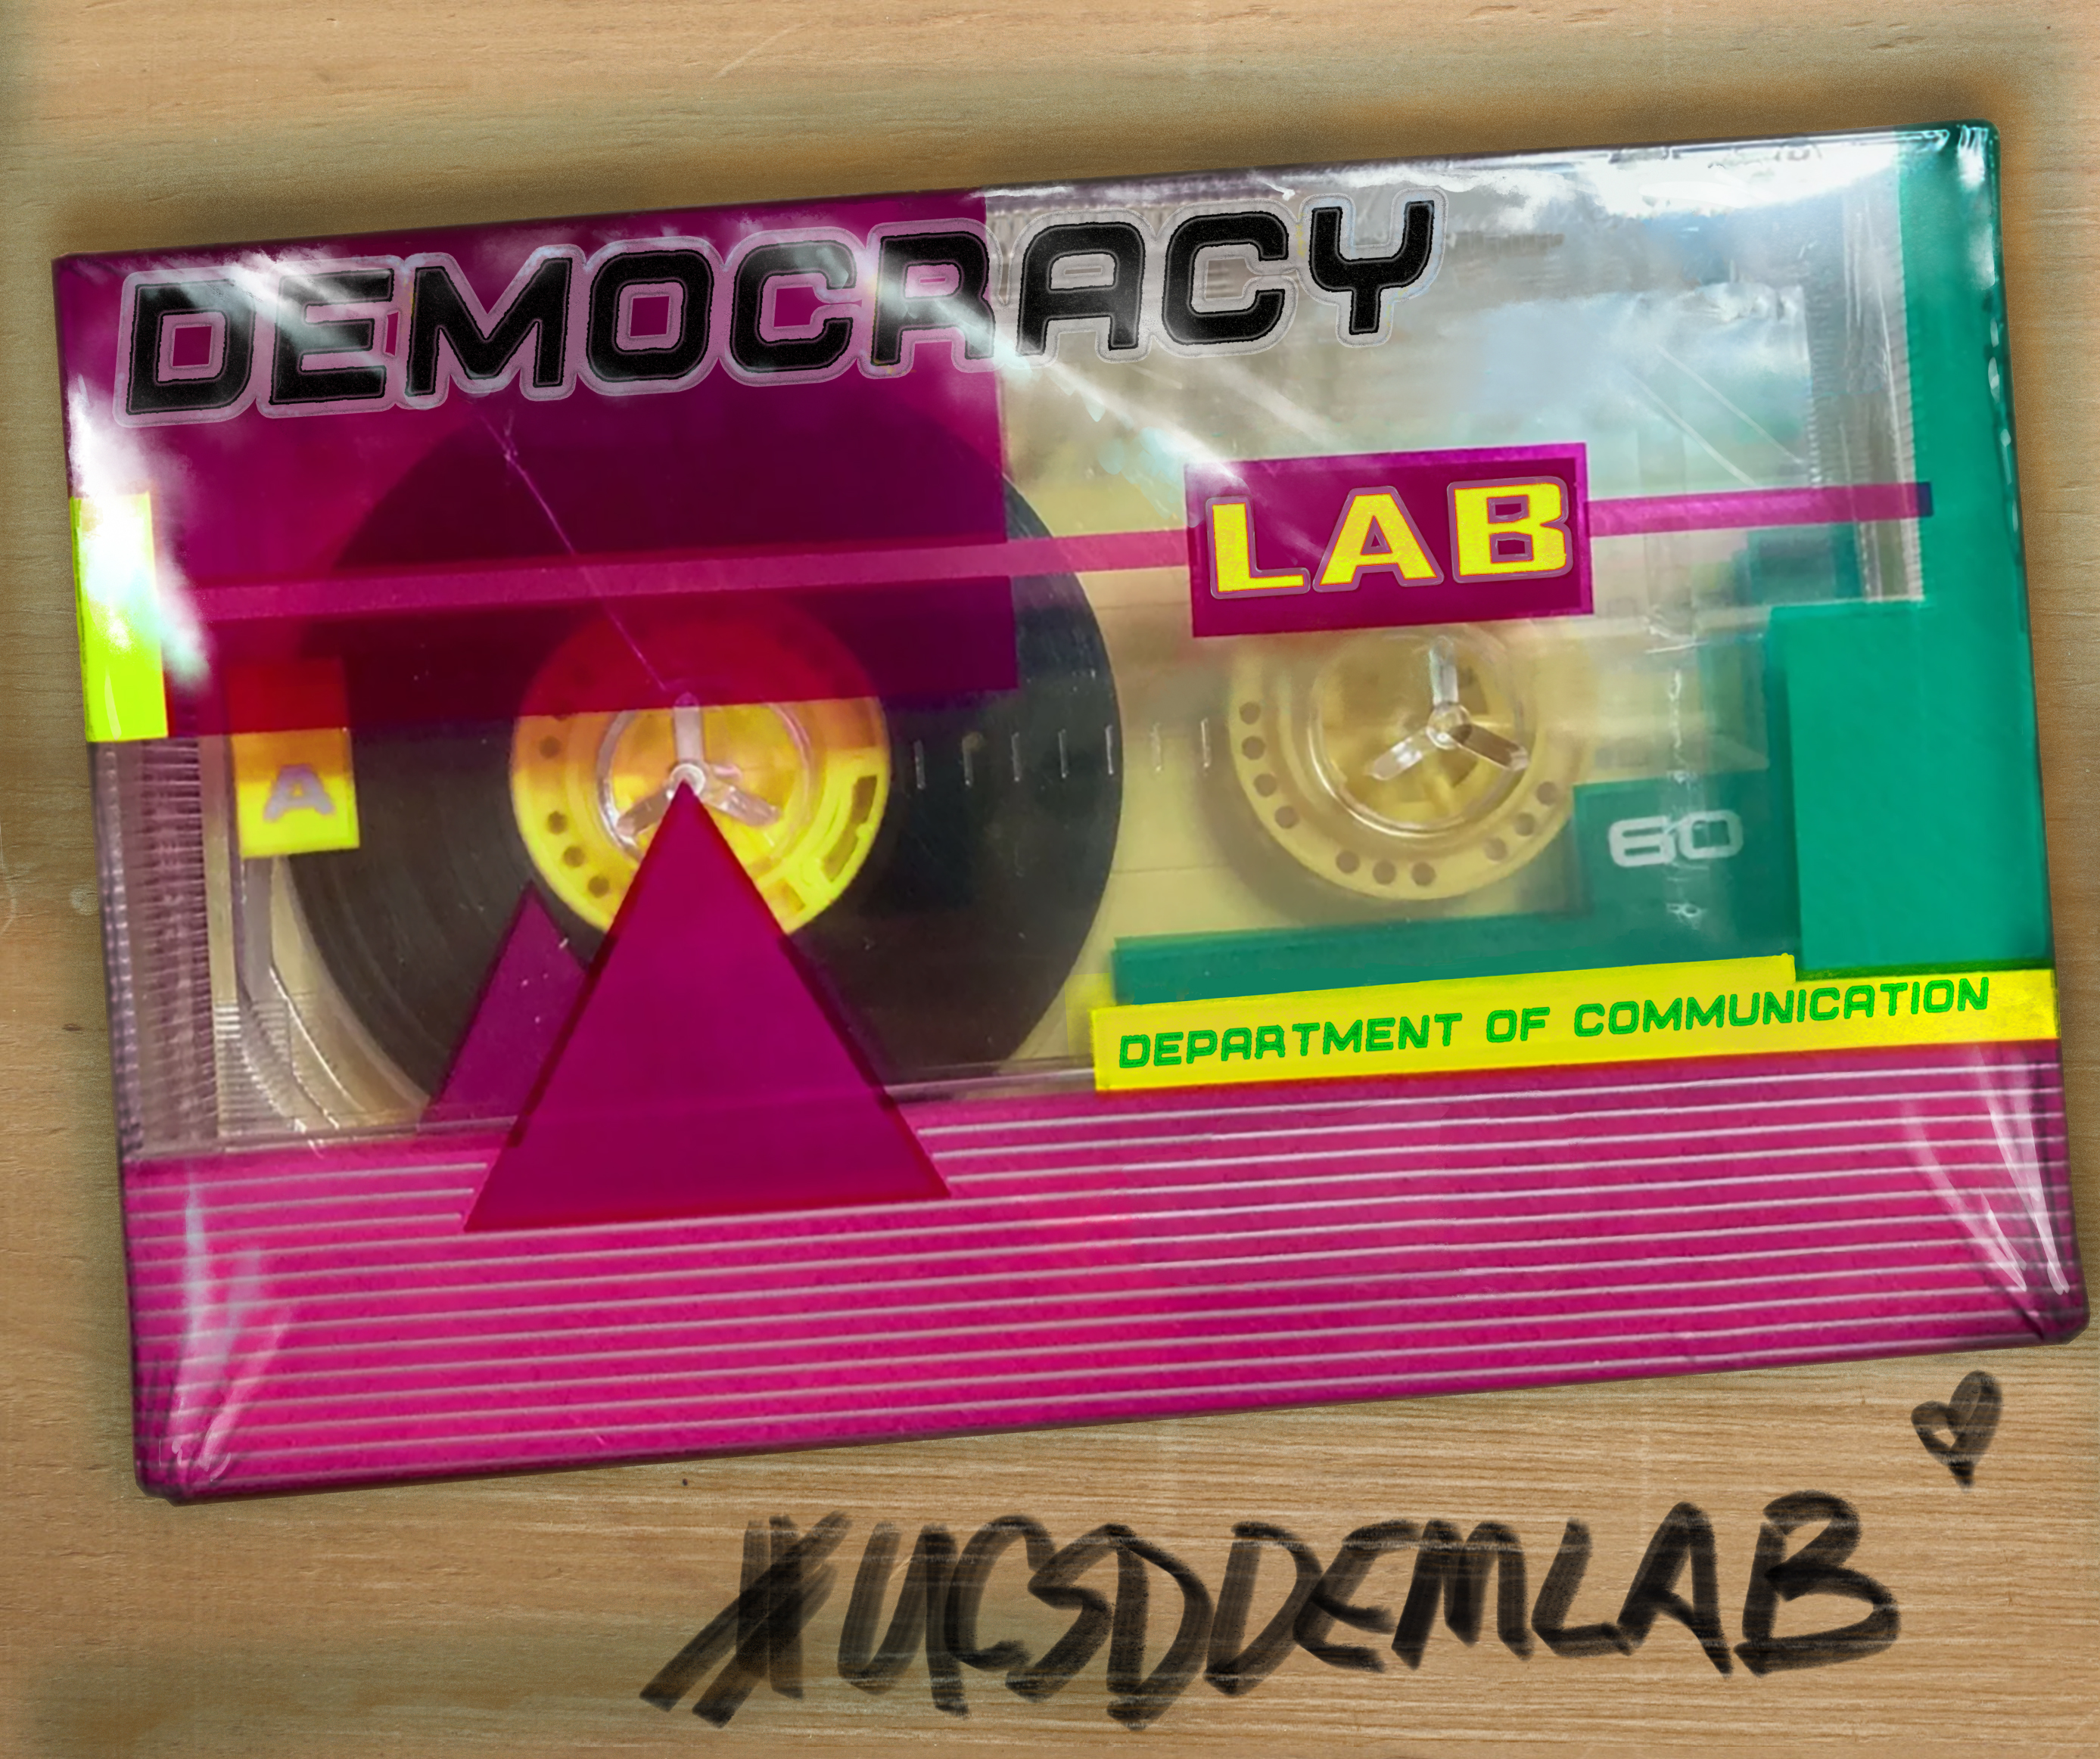 Vintage 80s blank casette tape with UCSD Democracy Lab printed as the logo and handwritten #UCSDDEMLAB